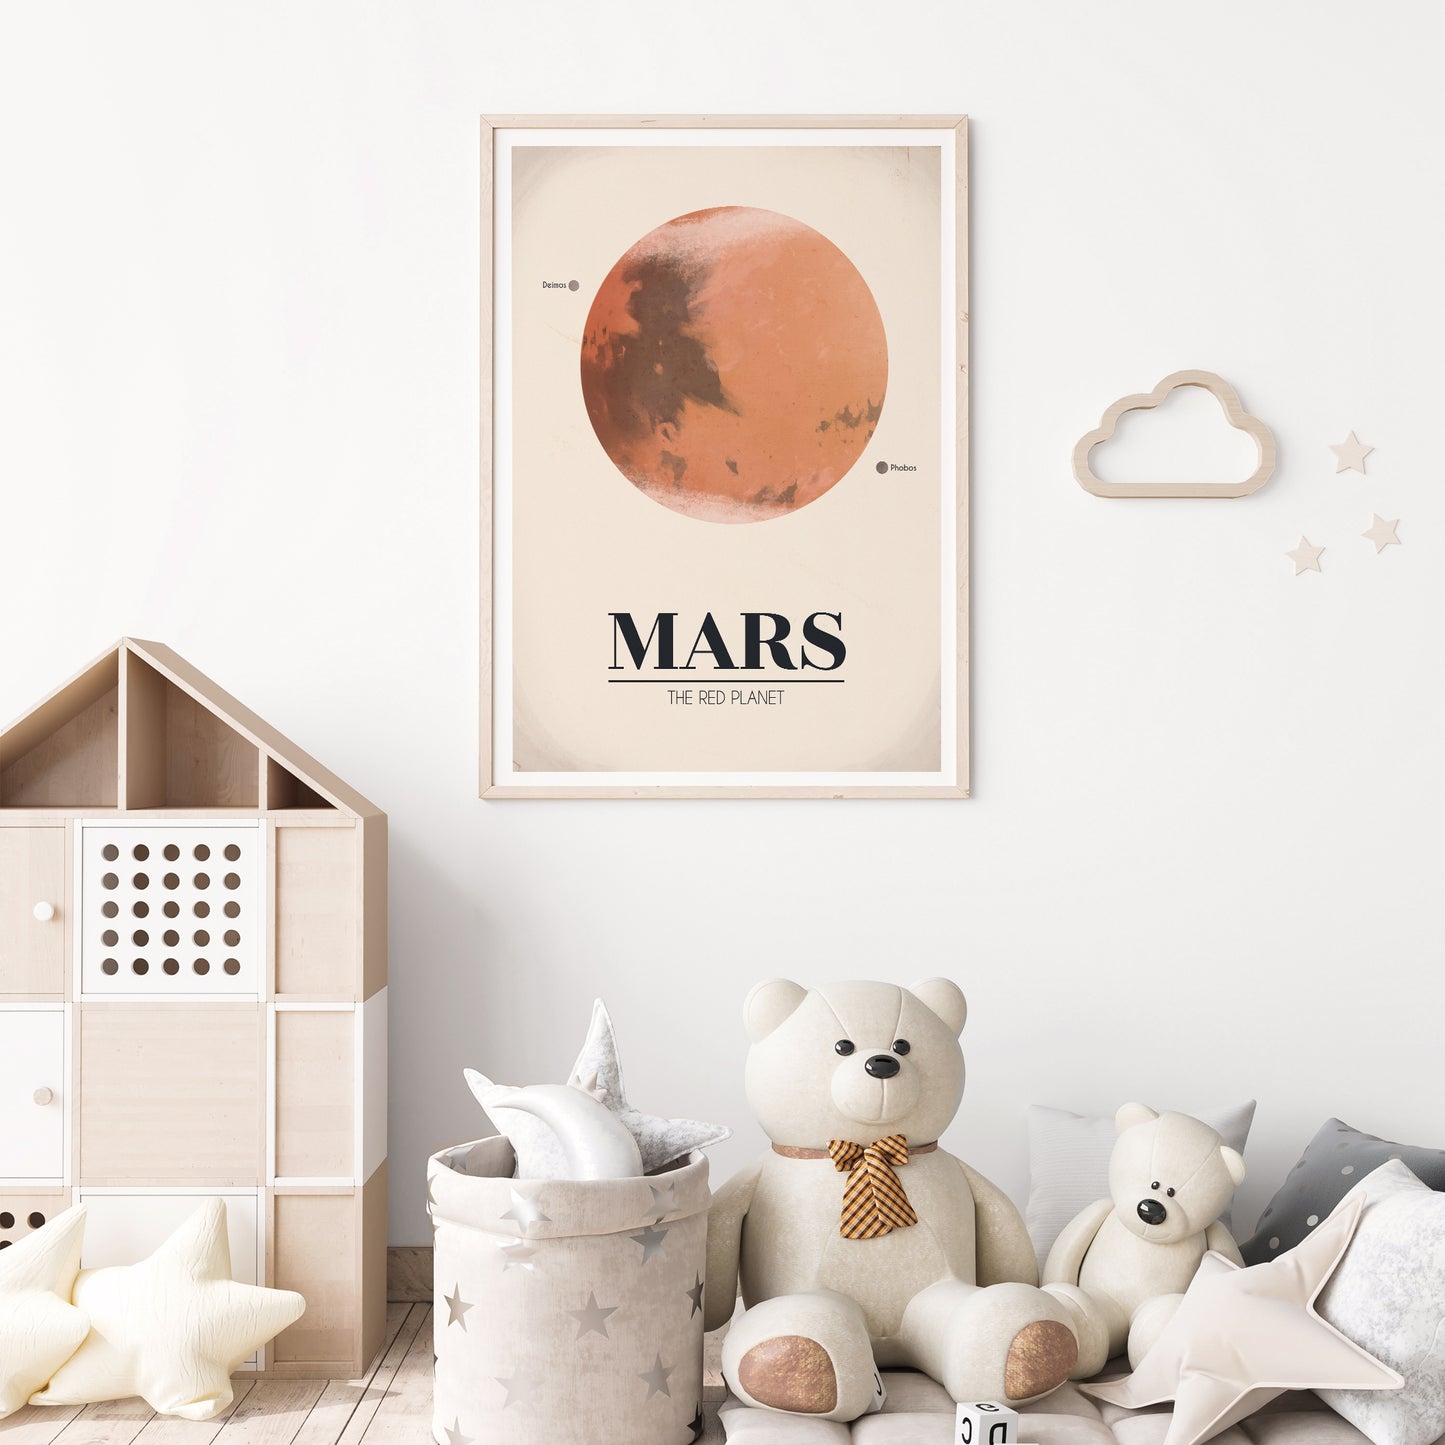 Planets of the solar system print - Mars